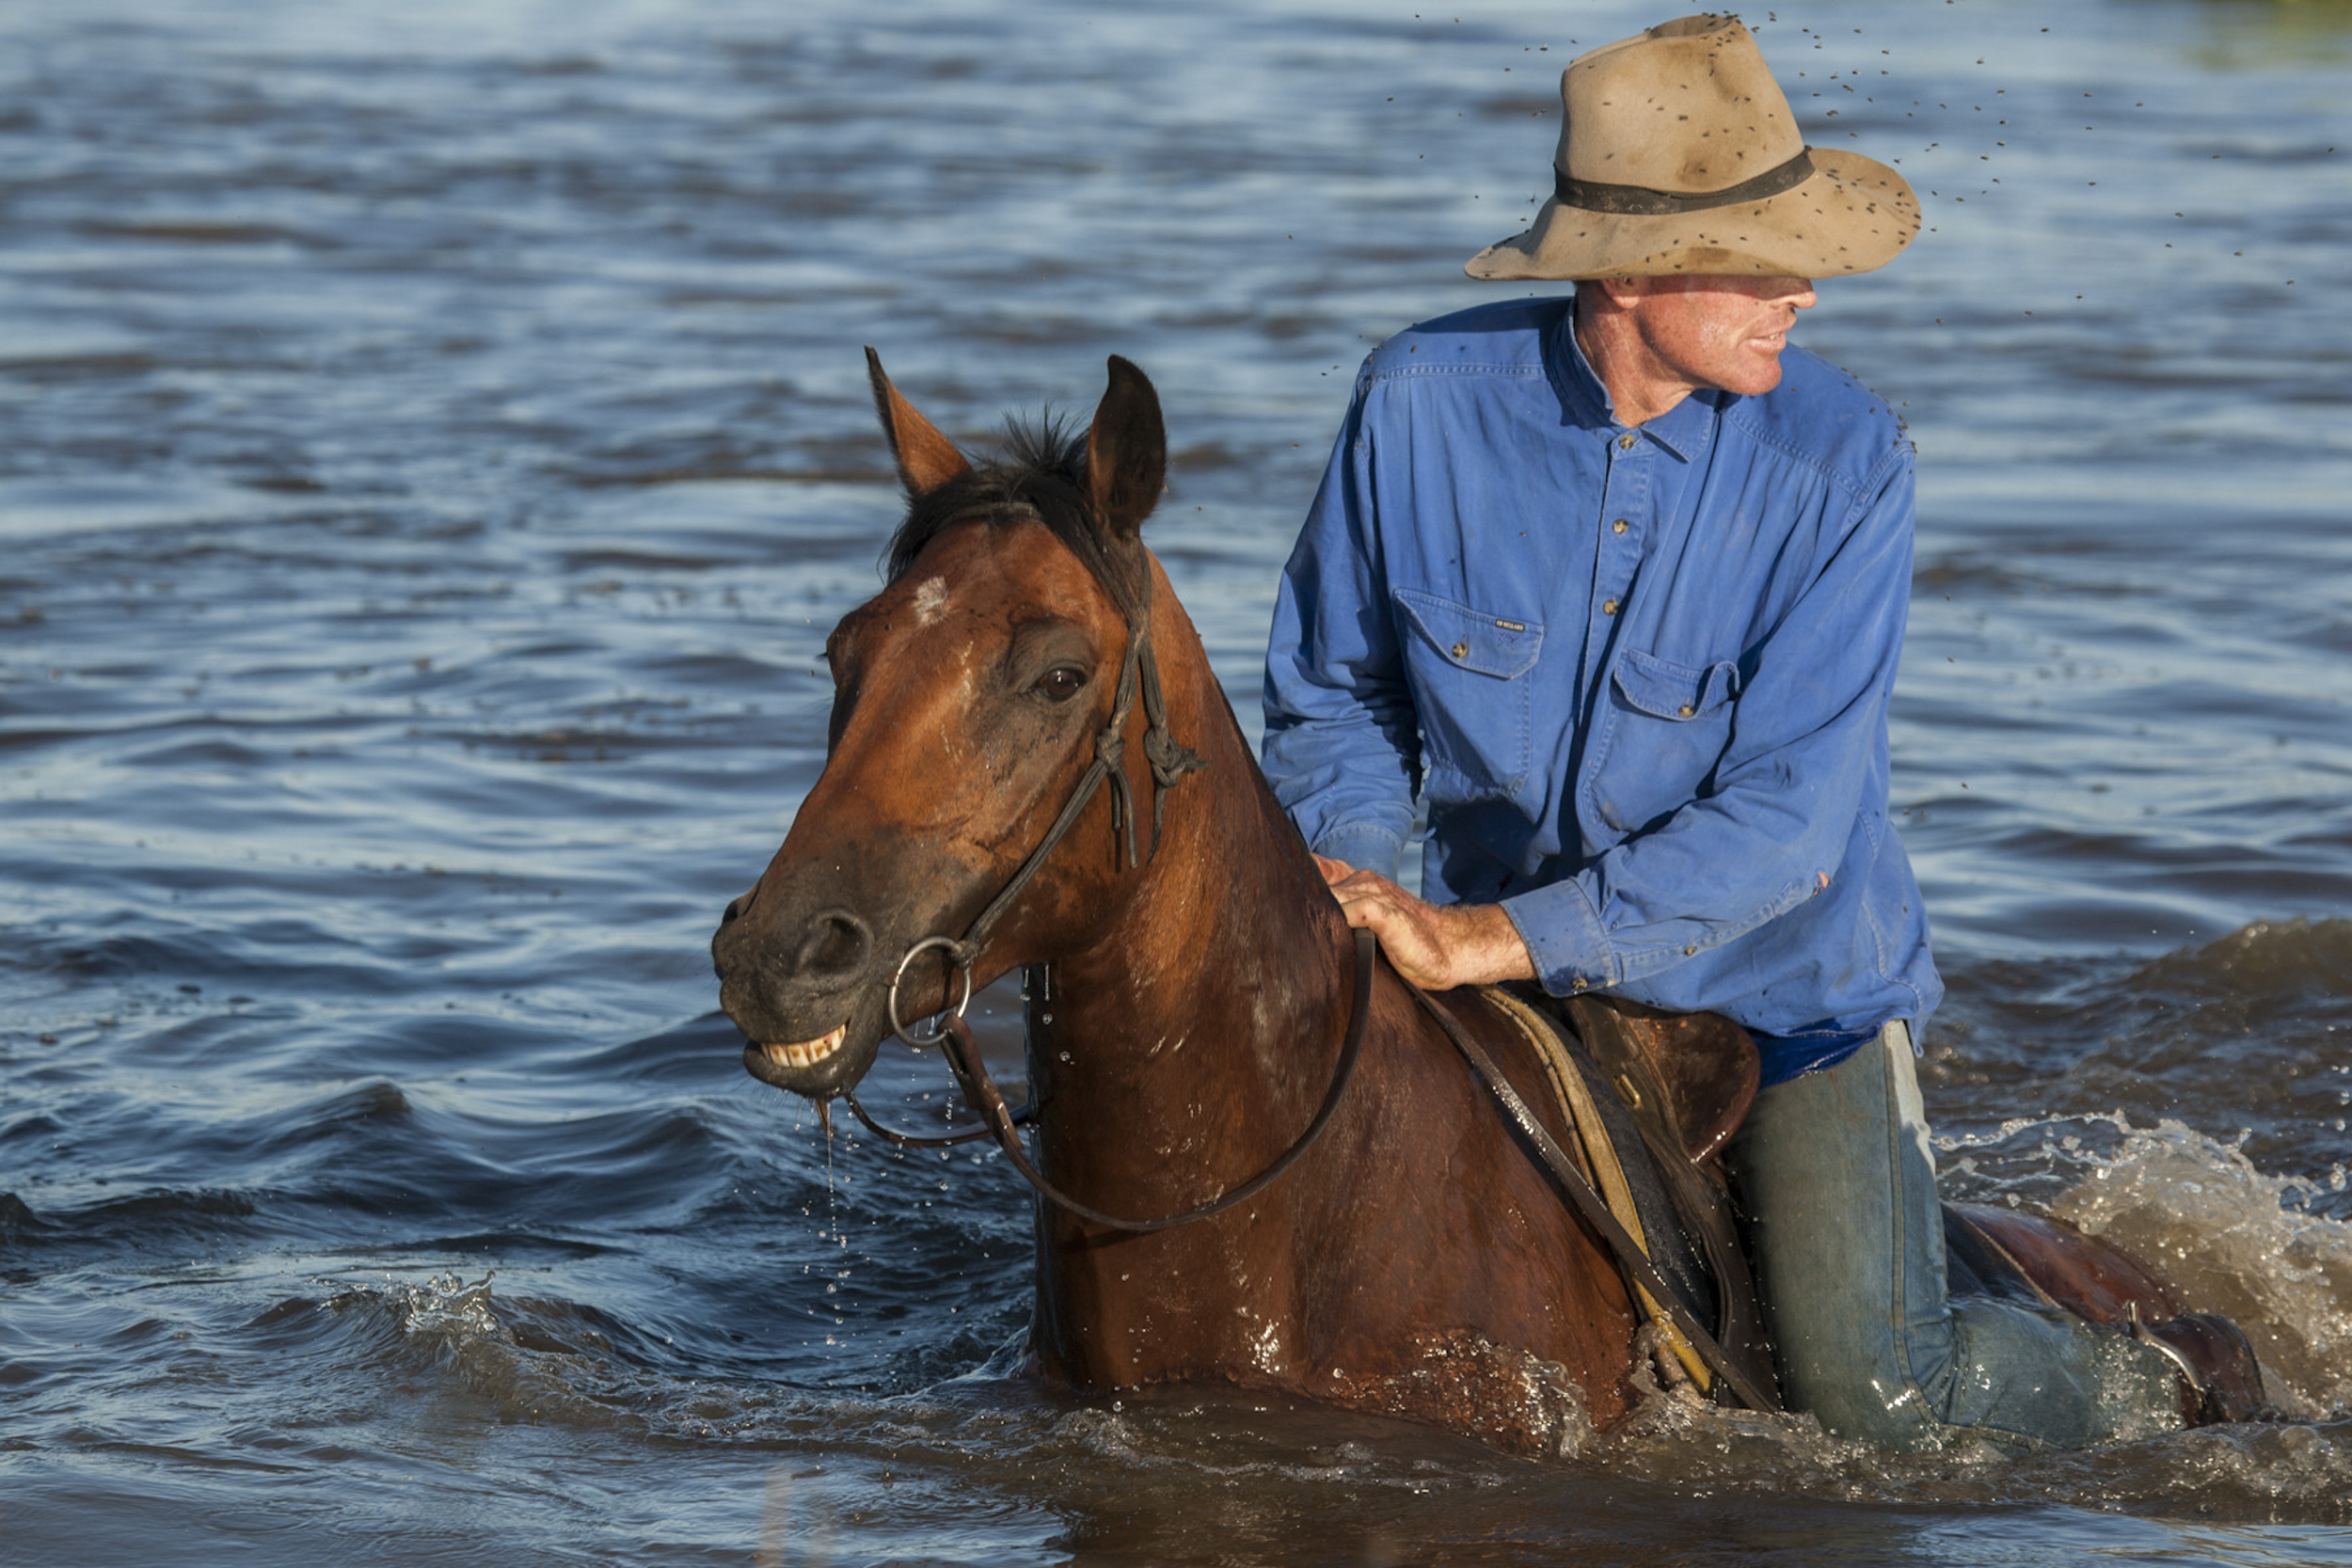  Garry Hall, Chairman of the Macquarie Marshes Environmental Landholders Association, crosses a river while herding his cattle. Macquarie Marshes, Australia 